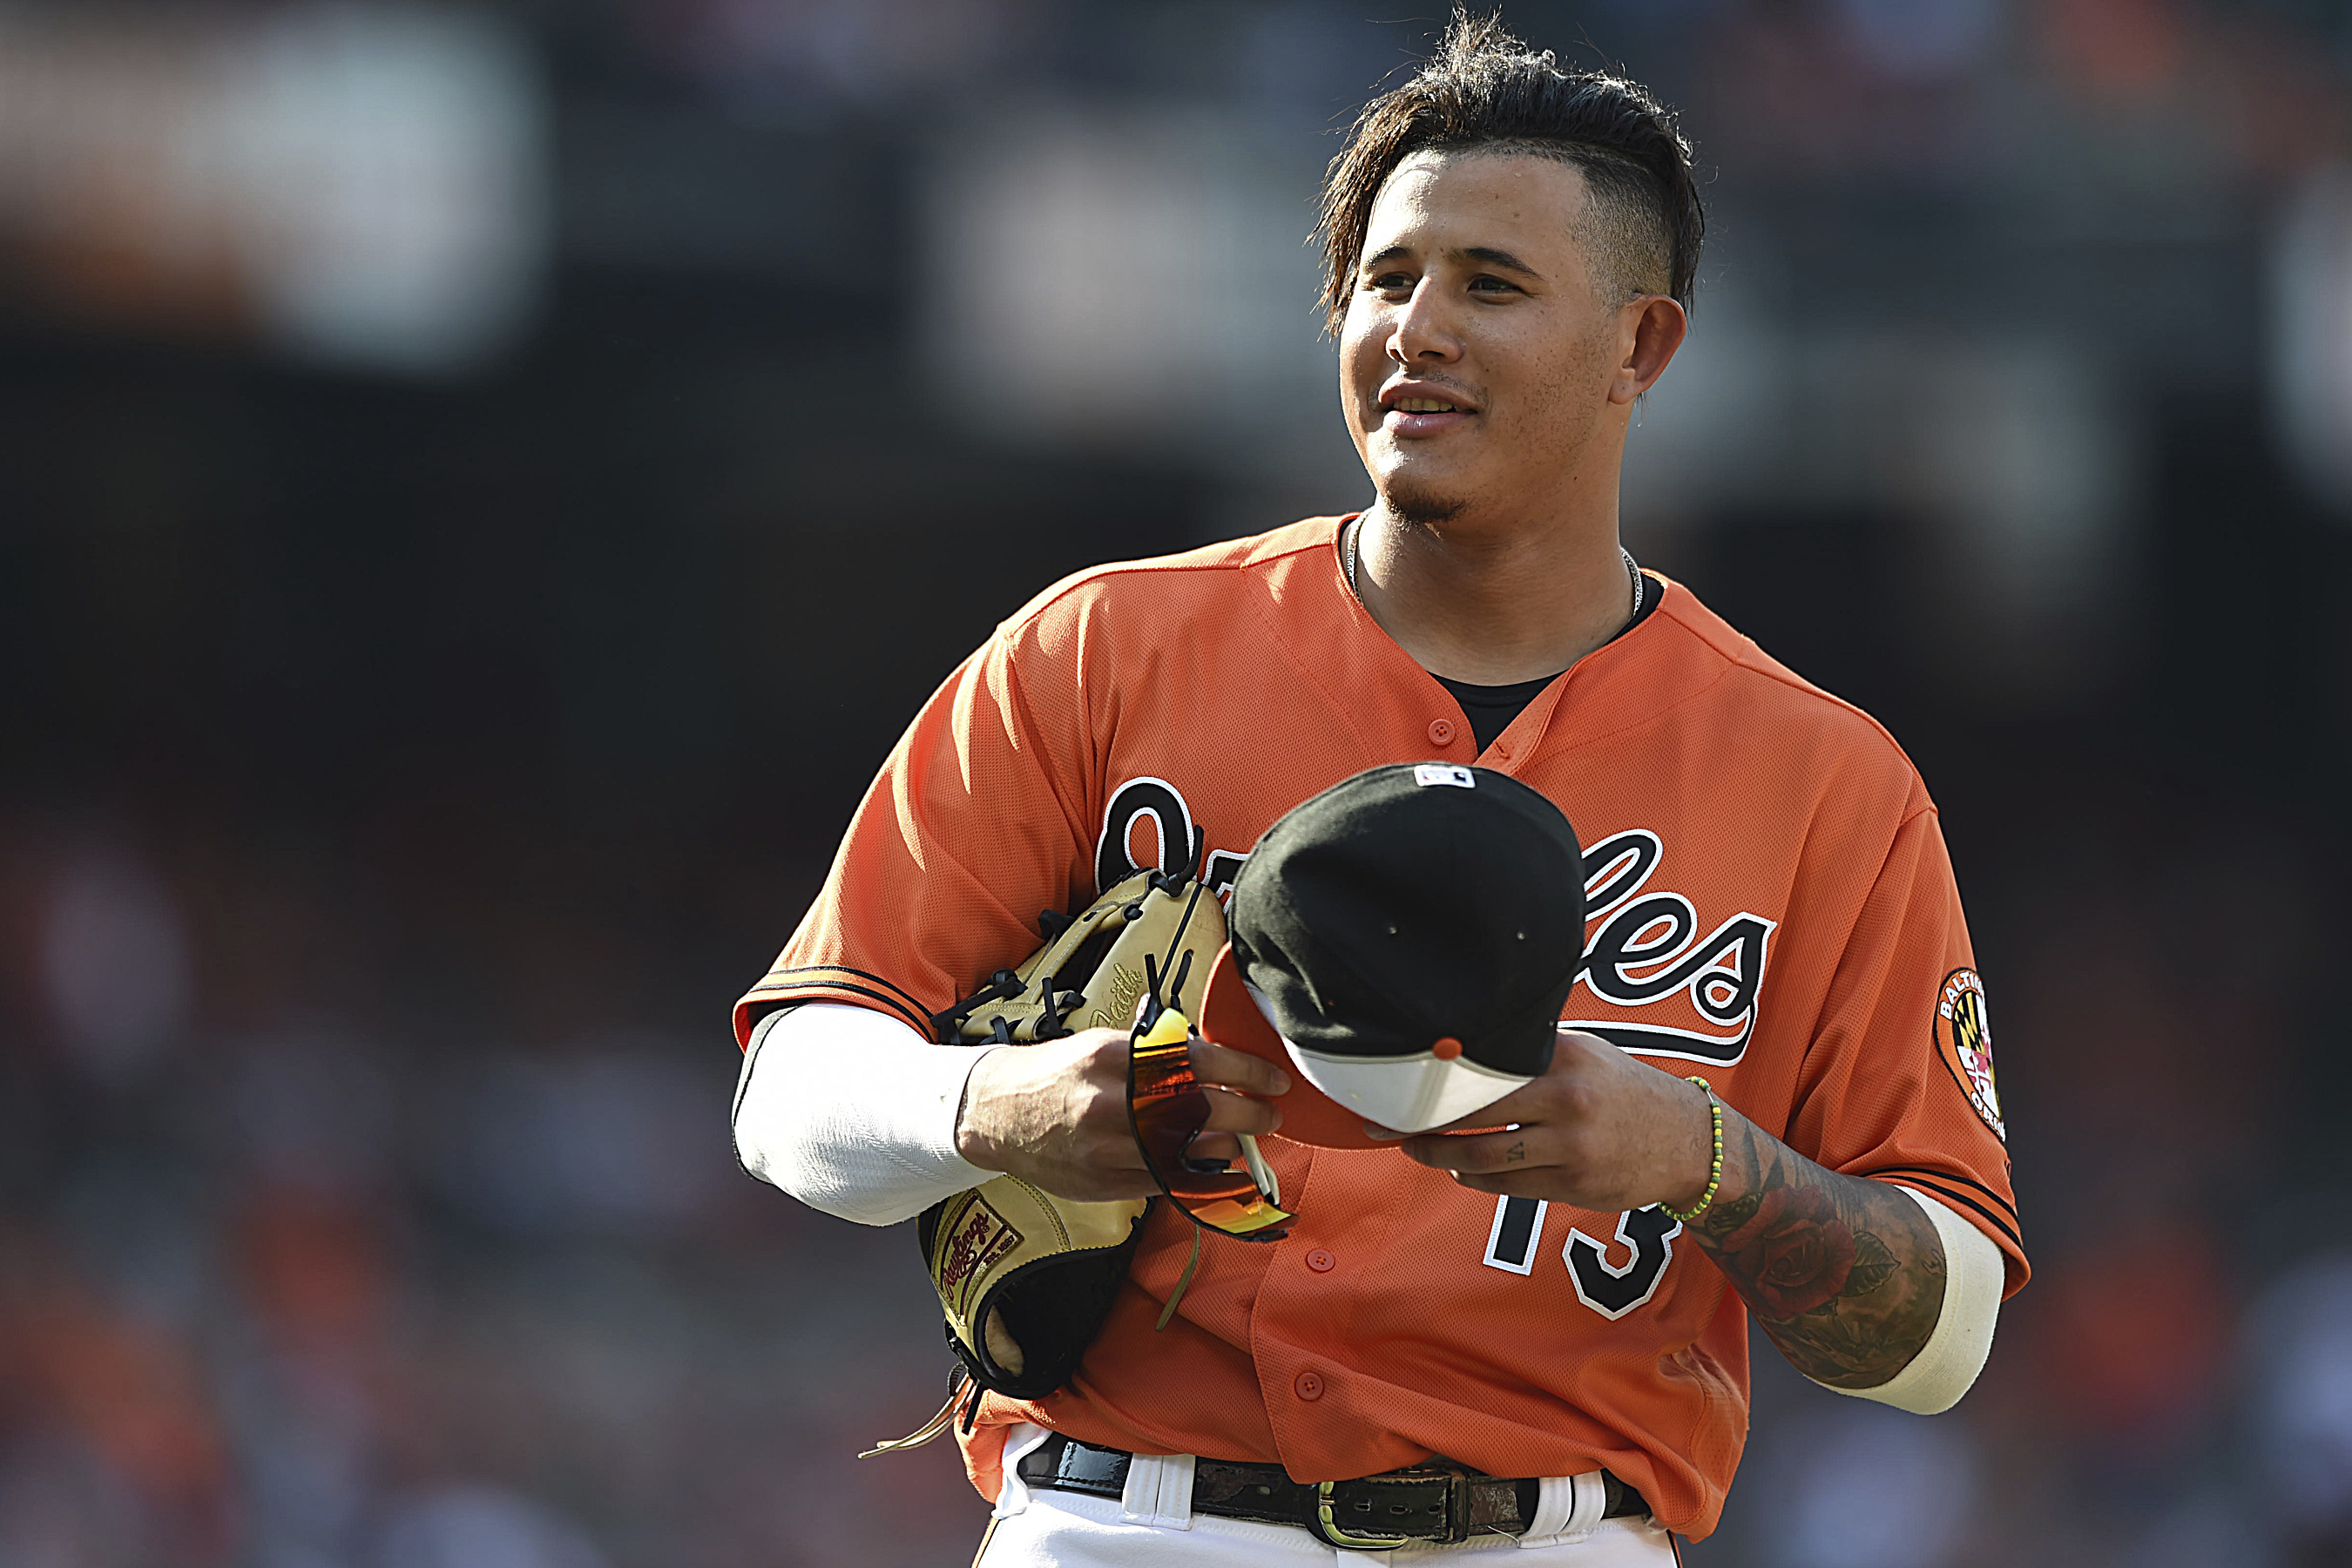 Trade talk is heating up for Orioles' Manny Machado - The Boston Globe